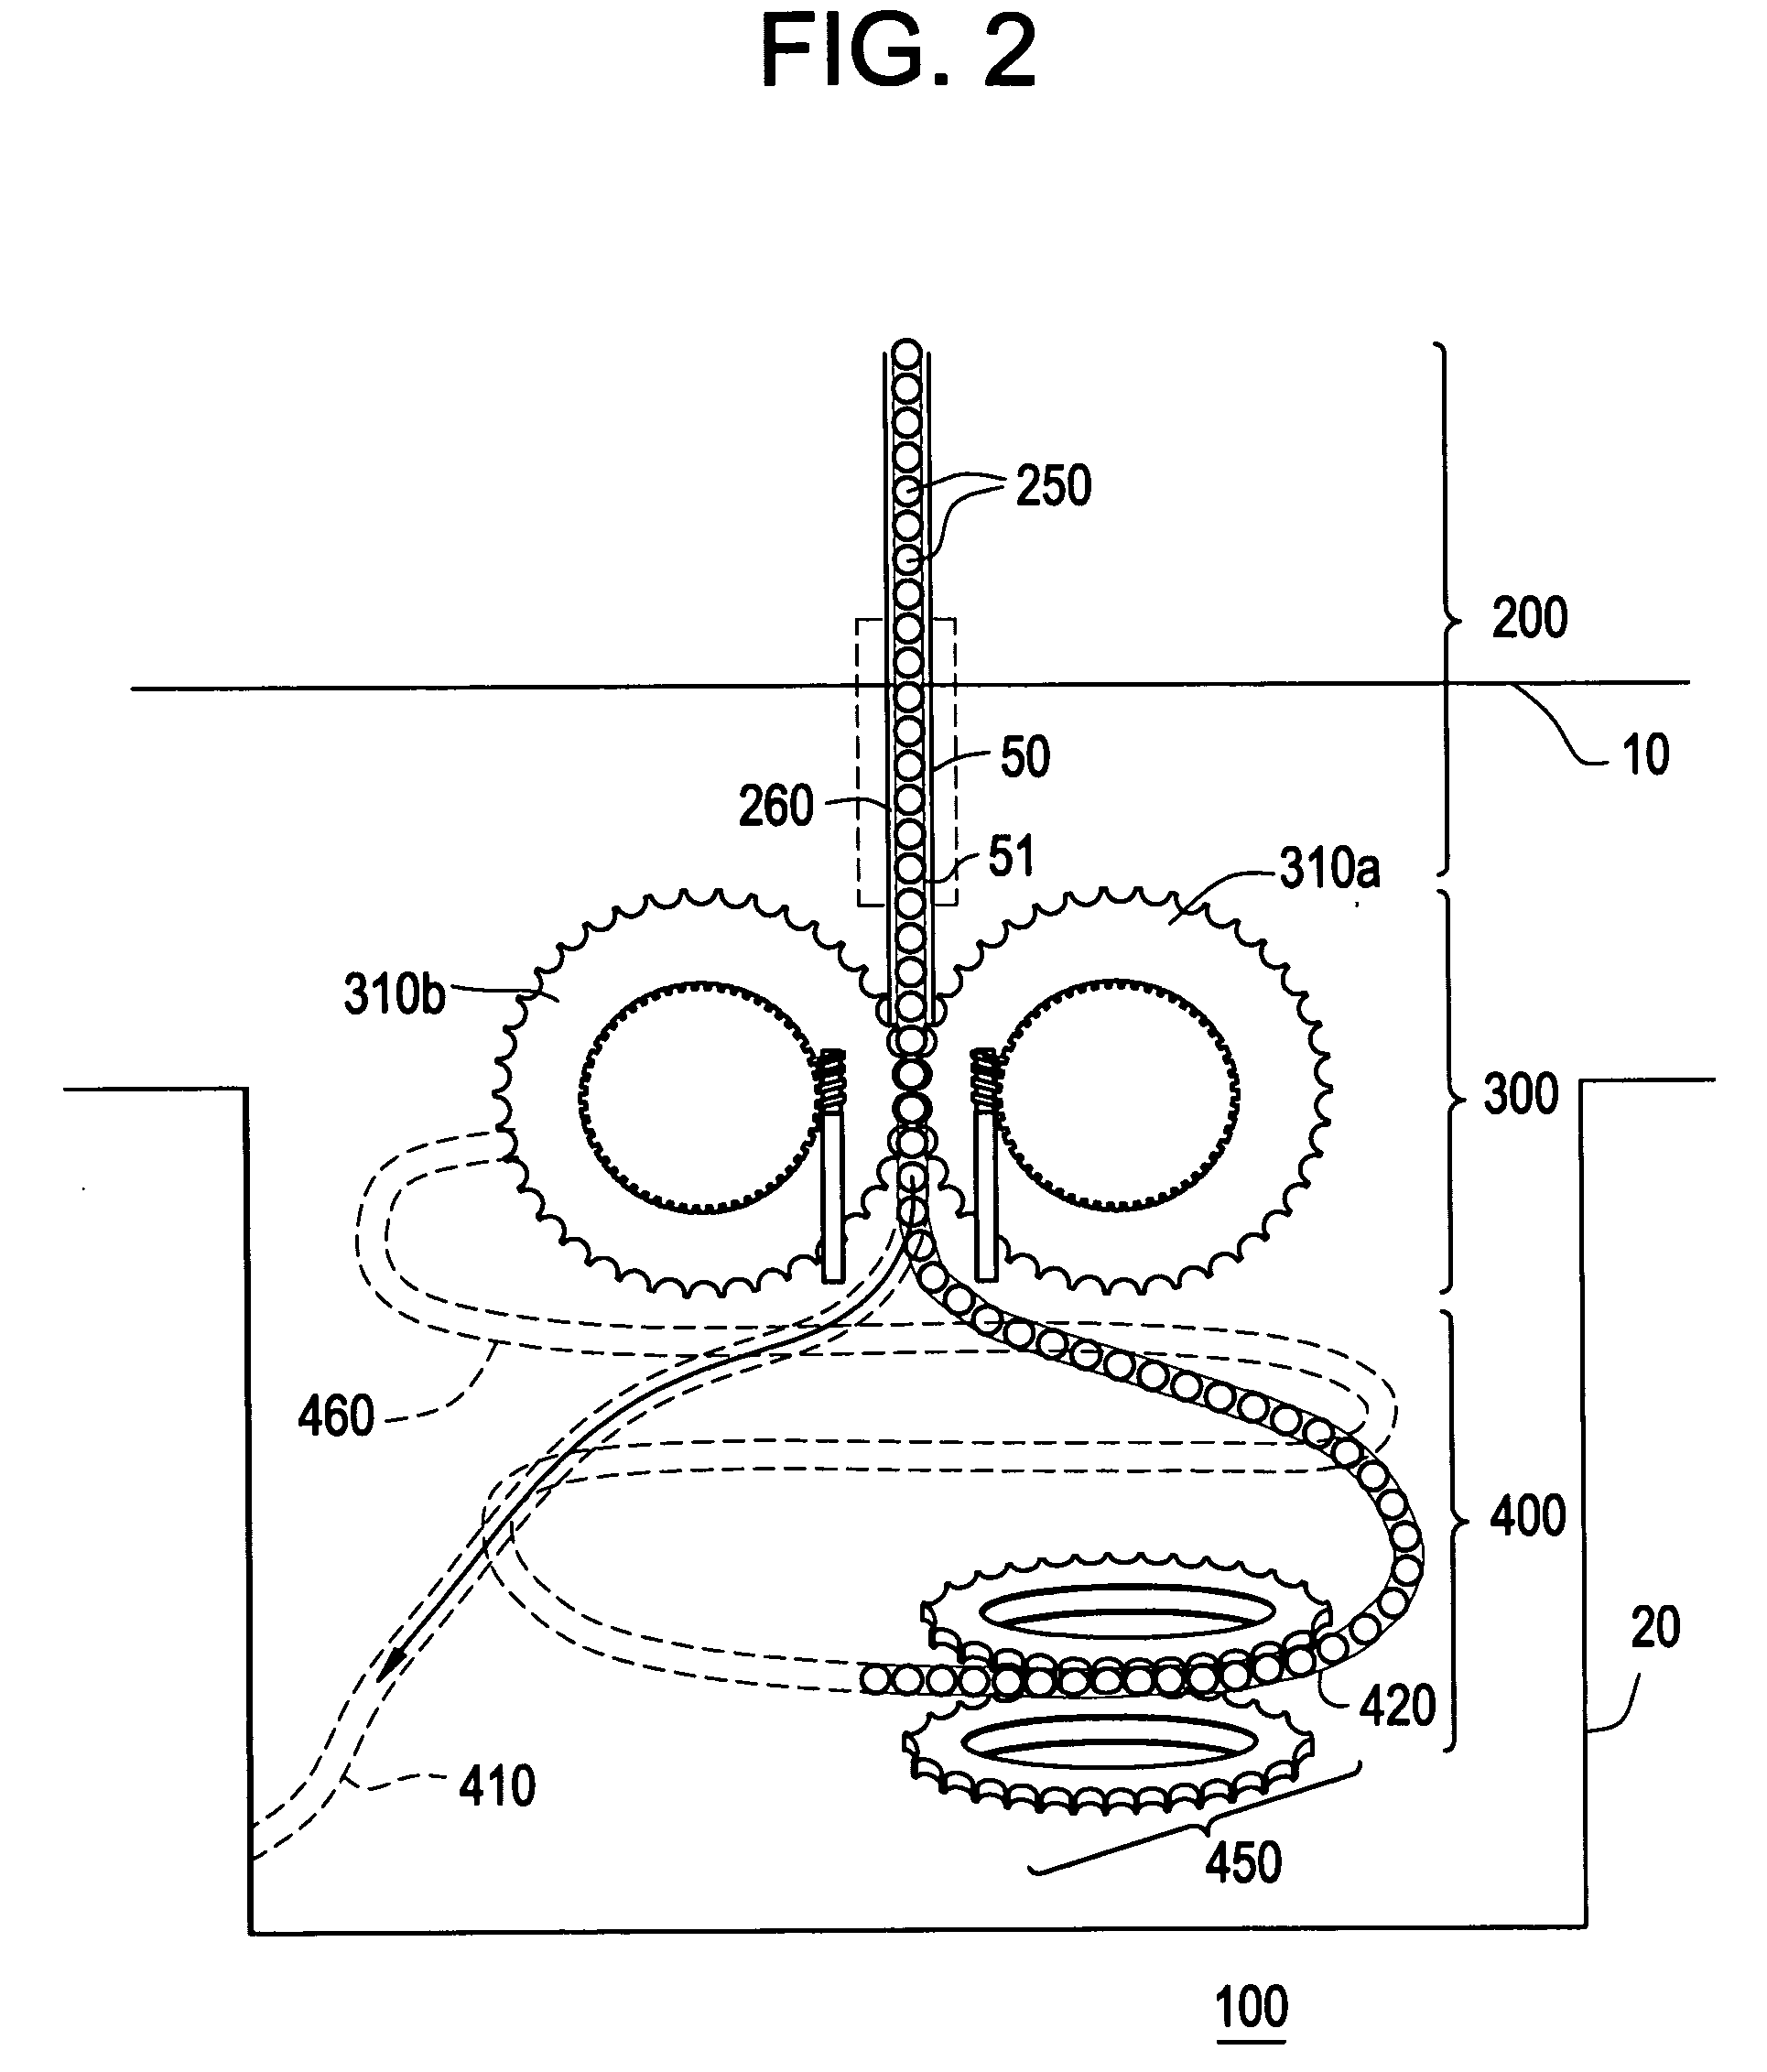 Apparatuses and methods for production of radioisotopes in nuclear reactor instrumentation tubes